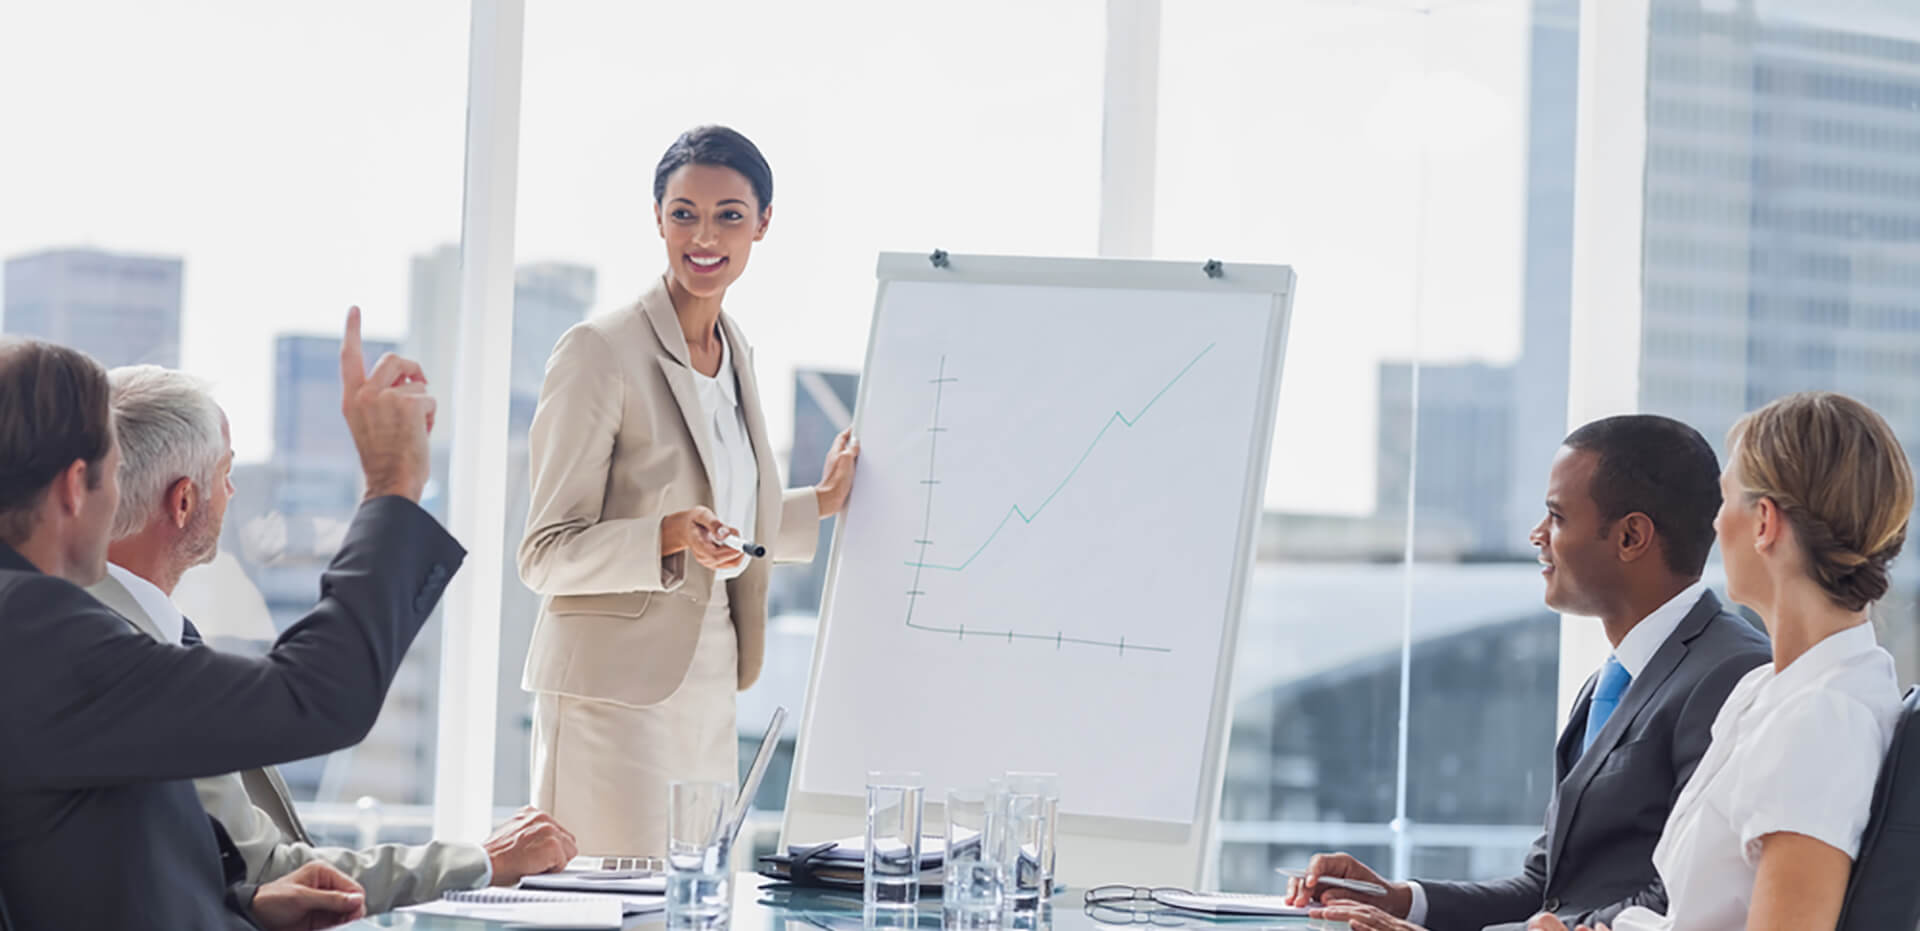 image of people in a boardroom, dressed in professional attire, looking at someone standing at the head of the table with a whiteboard drawing a graph.